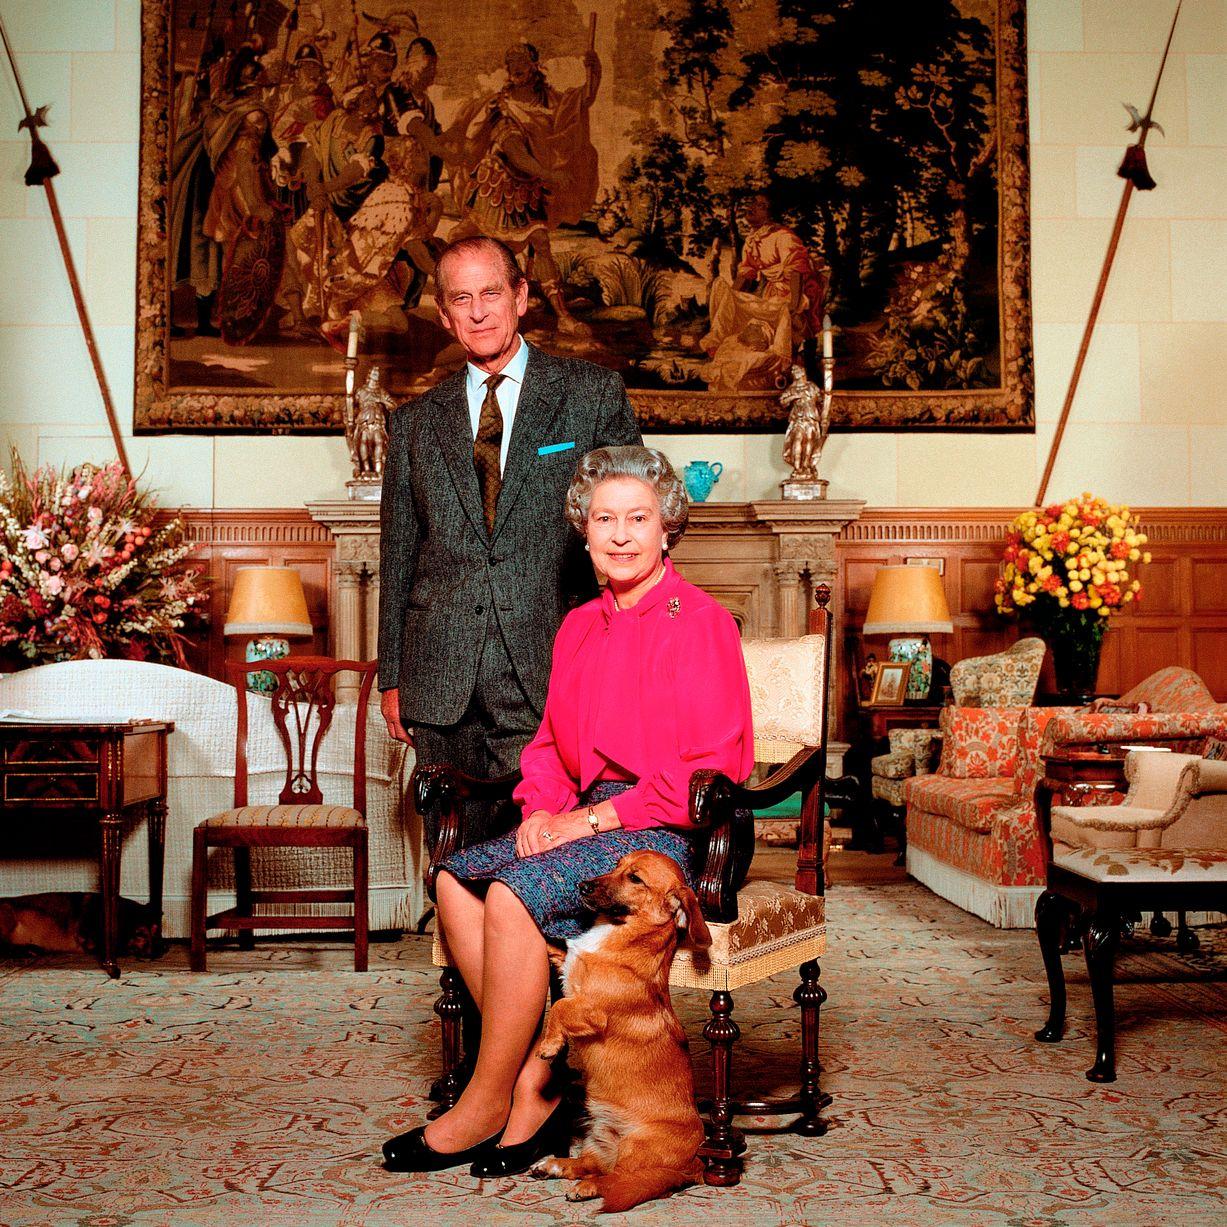 Her Majesty Queen Elizabeth II, 1990
C print
Estate signature stamped and numbered edition of 50

"I knew months in advance that I was going to take her portrait. And for months, I'd just sit there and think ‘what will go wrong’ – camera, film,